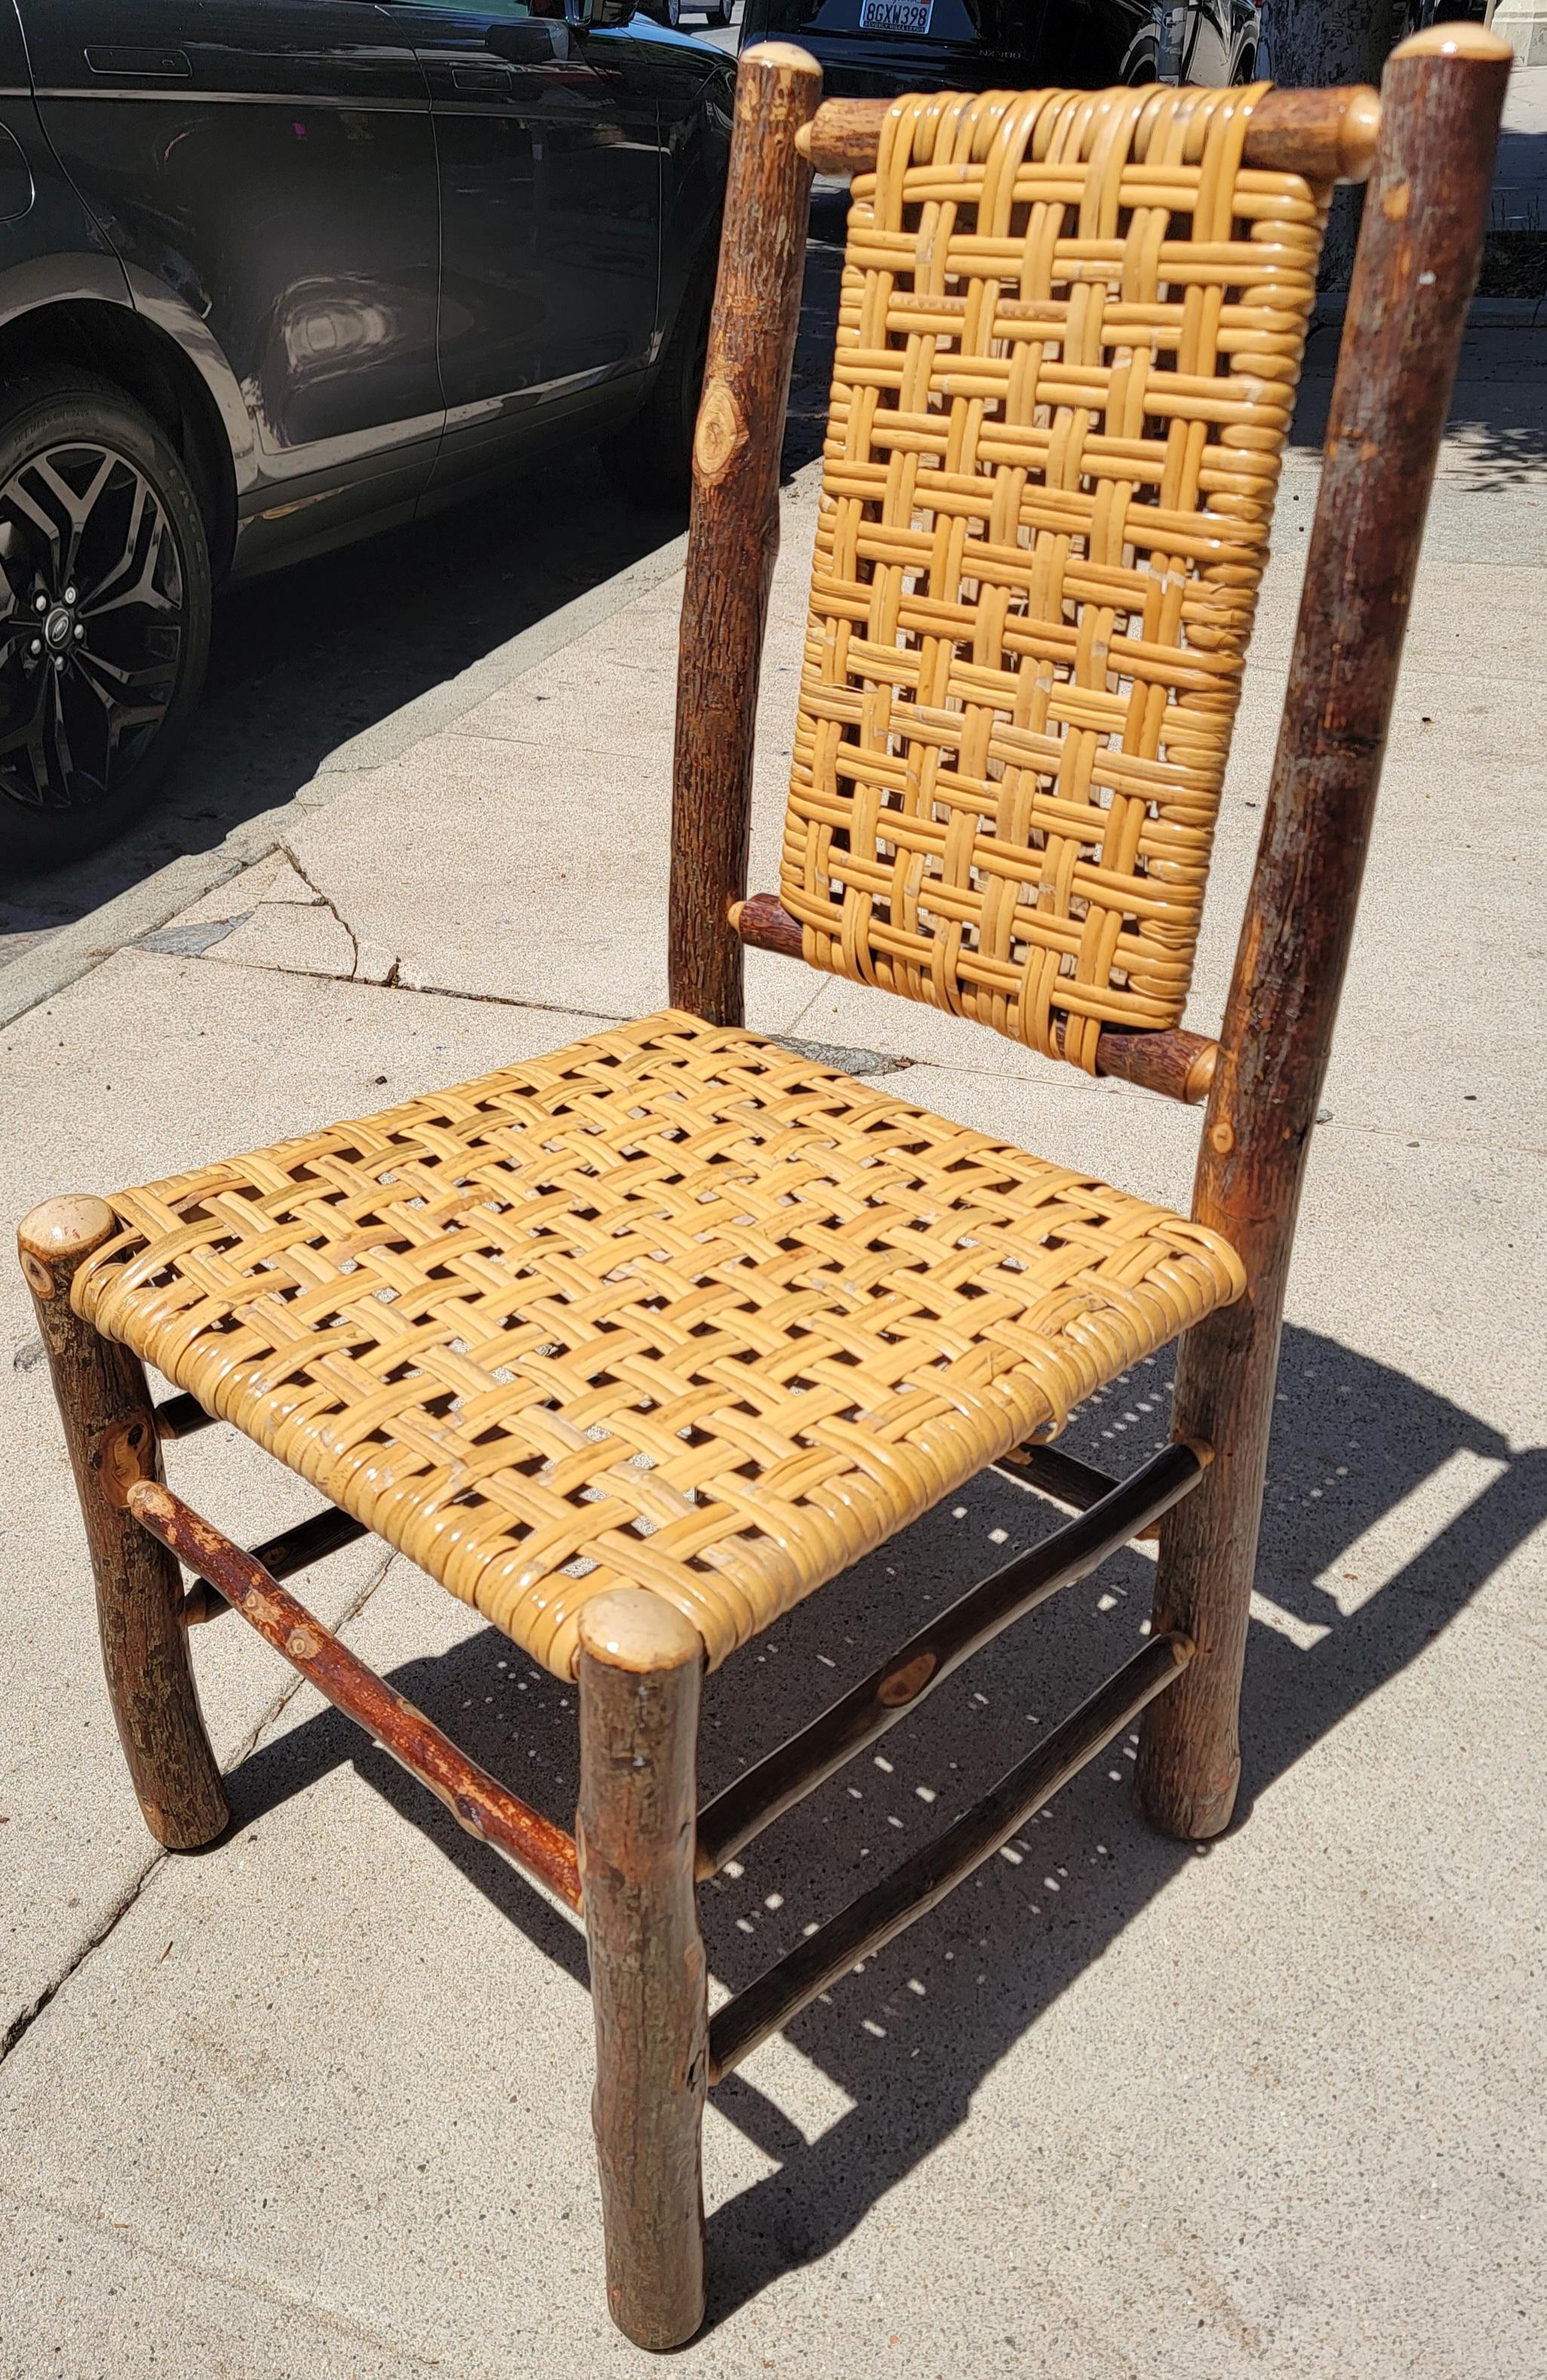 Set of 4 hign back armless old hickory chairs. The chairs are in great condition. Can be used a Breakfast nook, dining chairs or side chairs.